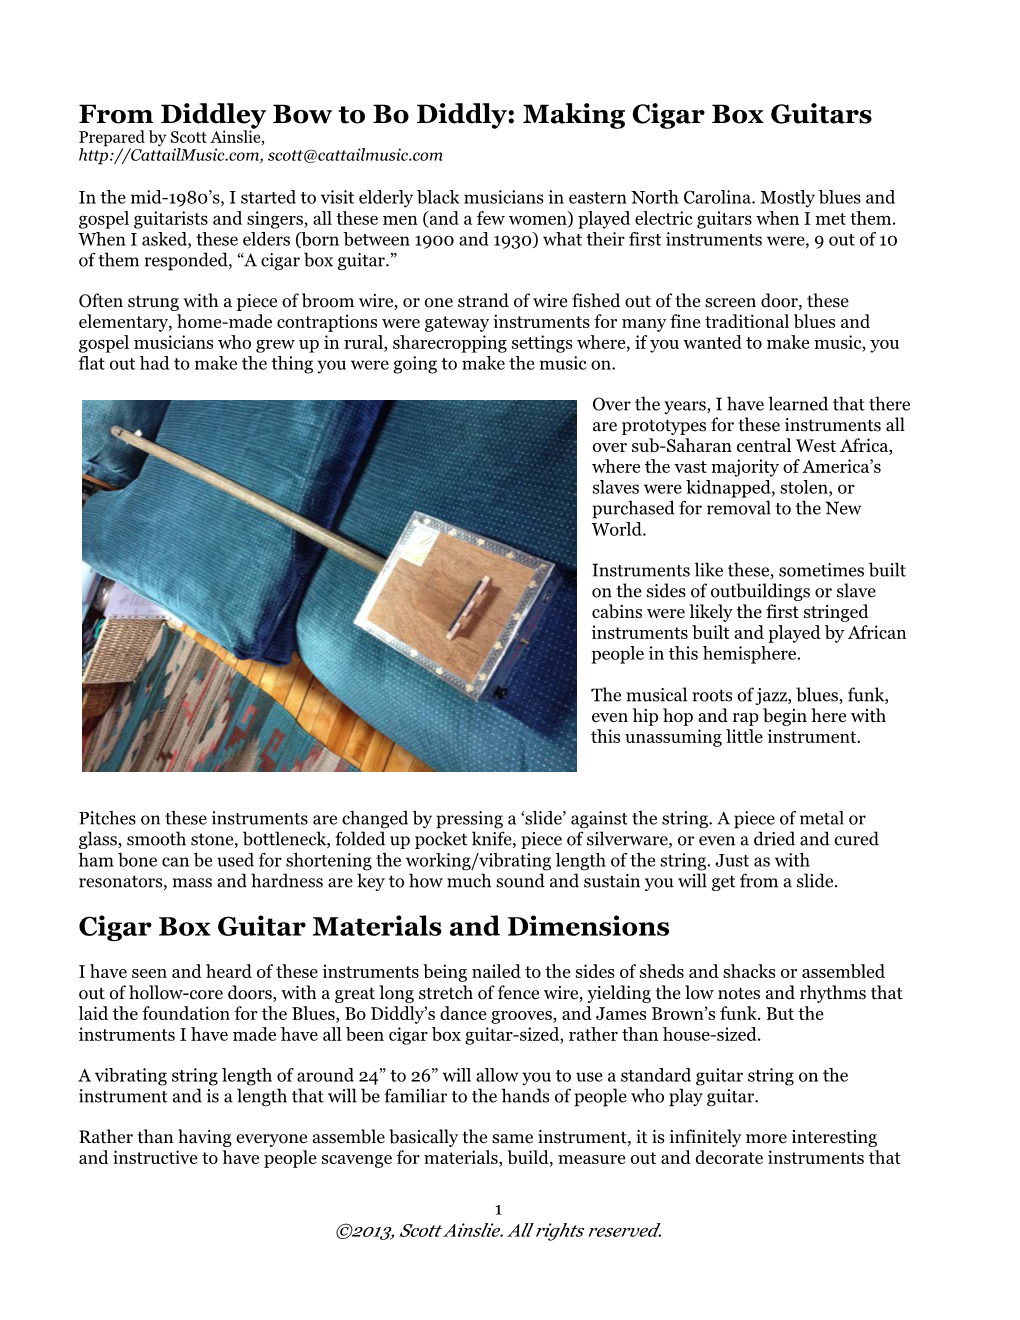 From Diddley Bow to Bo Diddly: Making Cigar Box Guitars Prepared by Scott Ainslie, Scott@Cattailmusic.Com